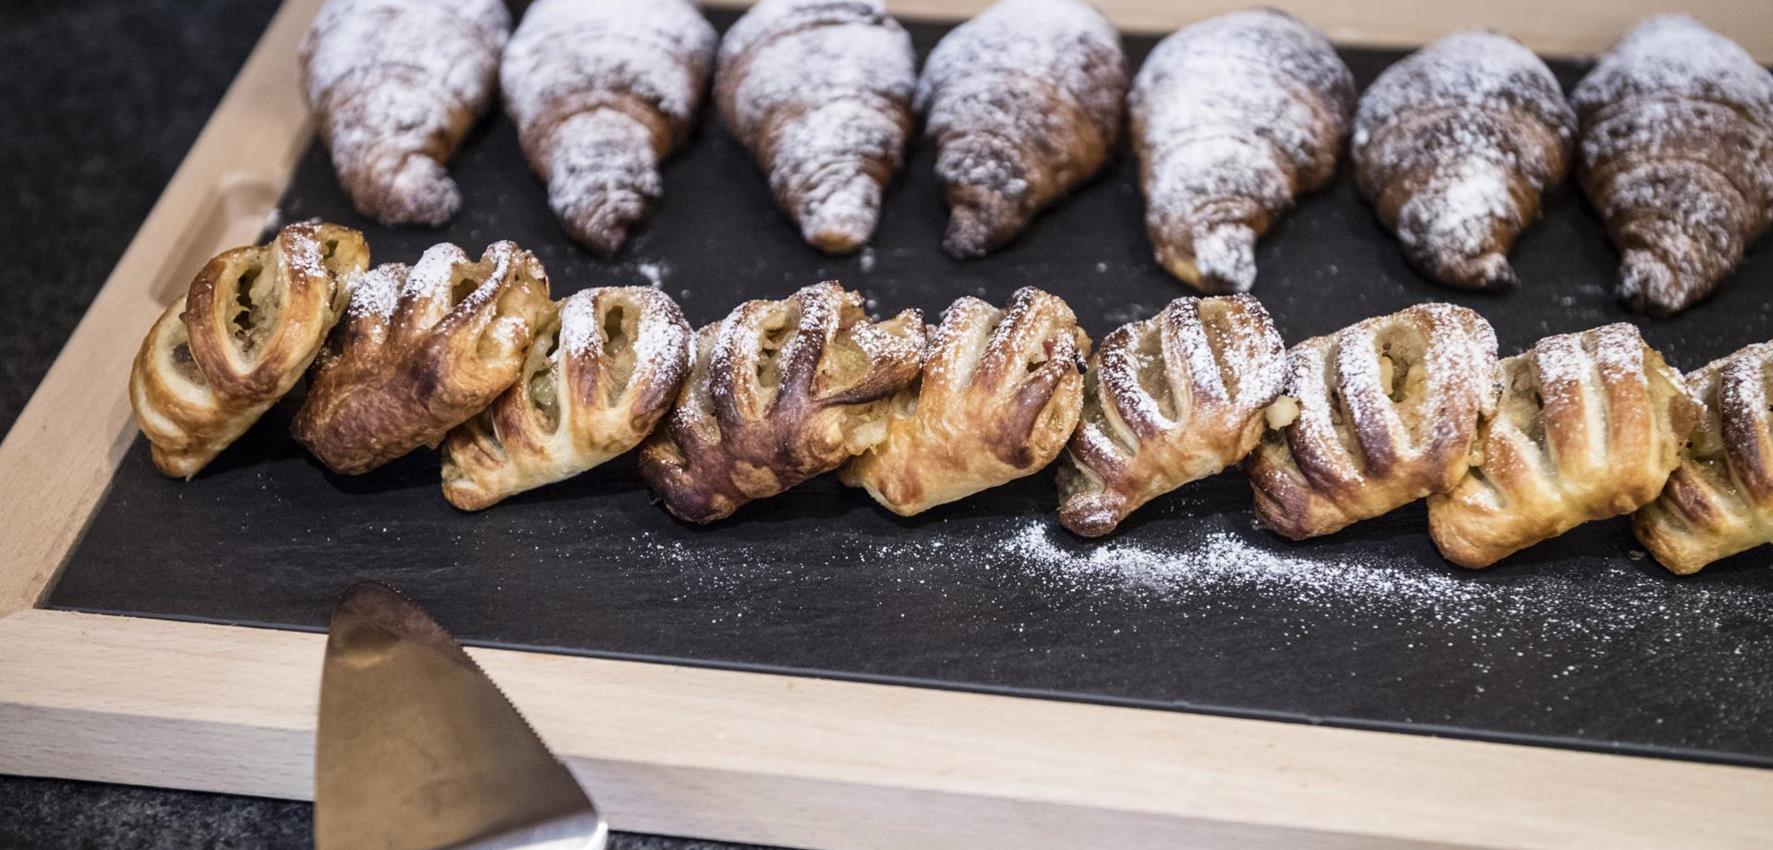 Croissants and Pastries